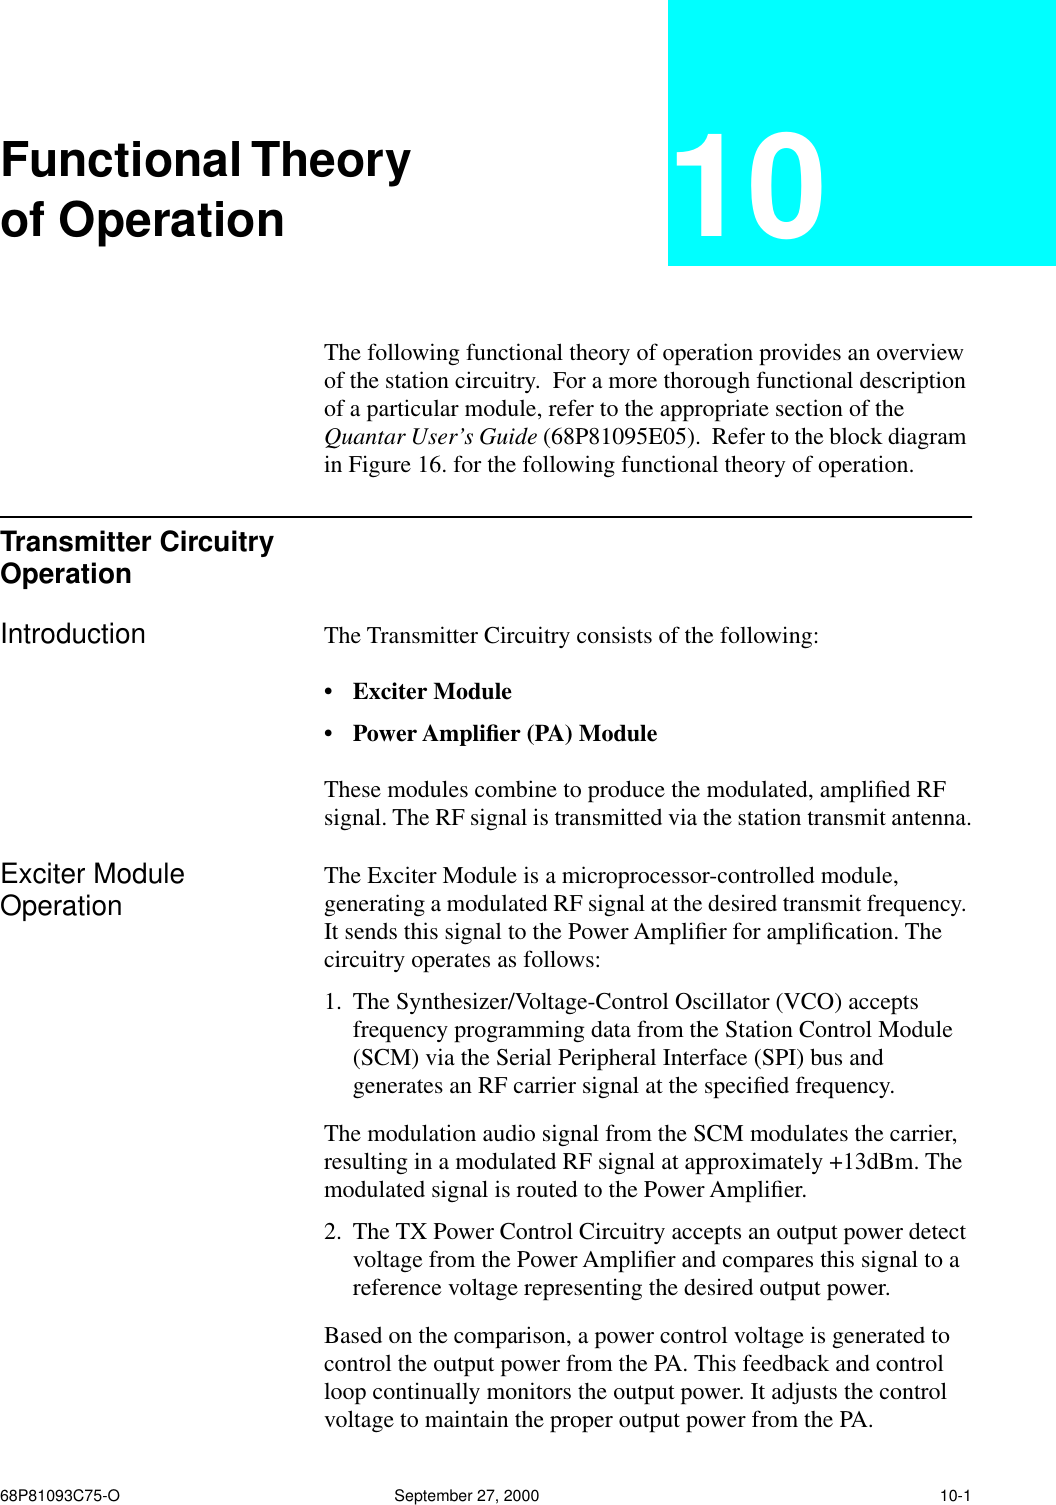 68P81093C75-O September 27, 2000 10-1Functional Theoryof Operation 10The following functional theory of operation provides an overview of the station circuitry.  For a more thorough functional description of a particular module, refer to the appropriate section of the Quantar User’s Guide (68P81095E05).  Refer to the block diagram in Figure 16. for the following functional theory of operation.Transmitter Circuitry OperationIntroduction The Transmitter Circuitry consists of the following: • Exciter Module • Power Ampliﬁer (PA) Module  These modules combine to produce the modulated, ampliﬁed RF signal. The RF signal is transmitted via the station transmit antenna.Exciter Module Operation The Exciter Module is a microprocessor-controlled module, generating a modulated RF signal at the desired transmit frequency. It sends this signal to the Power Ampliﬁer for ampliﬁcation. The circuitry operates as follows:1. The Synthesizer/Voltage-Control Oscillator (VCO) accepts frequency programming data from the Station Control Module (SCM) via the Serial Peripheral Interface (SPI) bus and generates an RF carrier signal at the speciﬁed frequency.  The modulation audio signal from the SCM modulates the carrier, resulting in a modulated RF signal at approximately +13dBm. The modulated signal is routed to the Power Ampliﬁer.2. The TX Power Control Circuitry accepts an output power detect voltage from the Power Ampliﬁer and compares this signal to a reference voltage representing the desired output power. Based on the comparison, a power control voltage is generated to control the output power from the PA. This feedback and control loop continually monitors the output power. It adjusts the control voltage to maintain the proper output power from the PA.